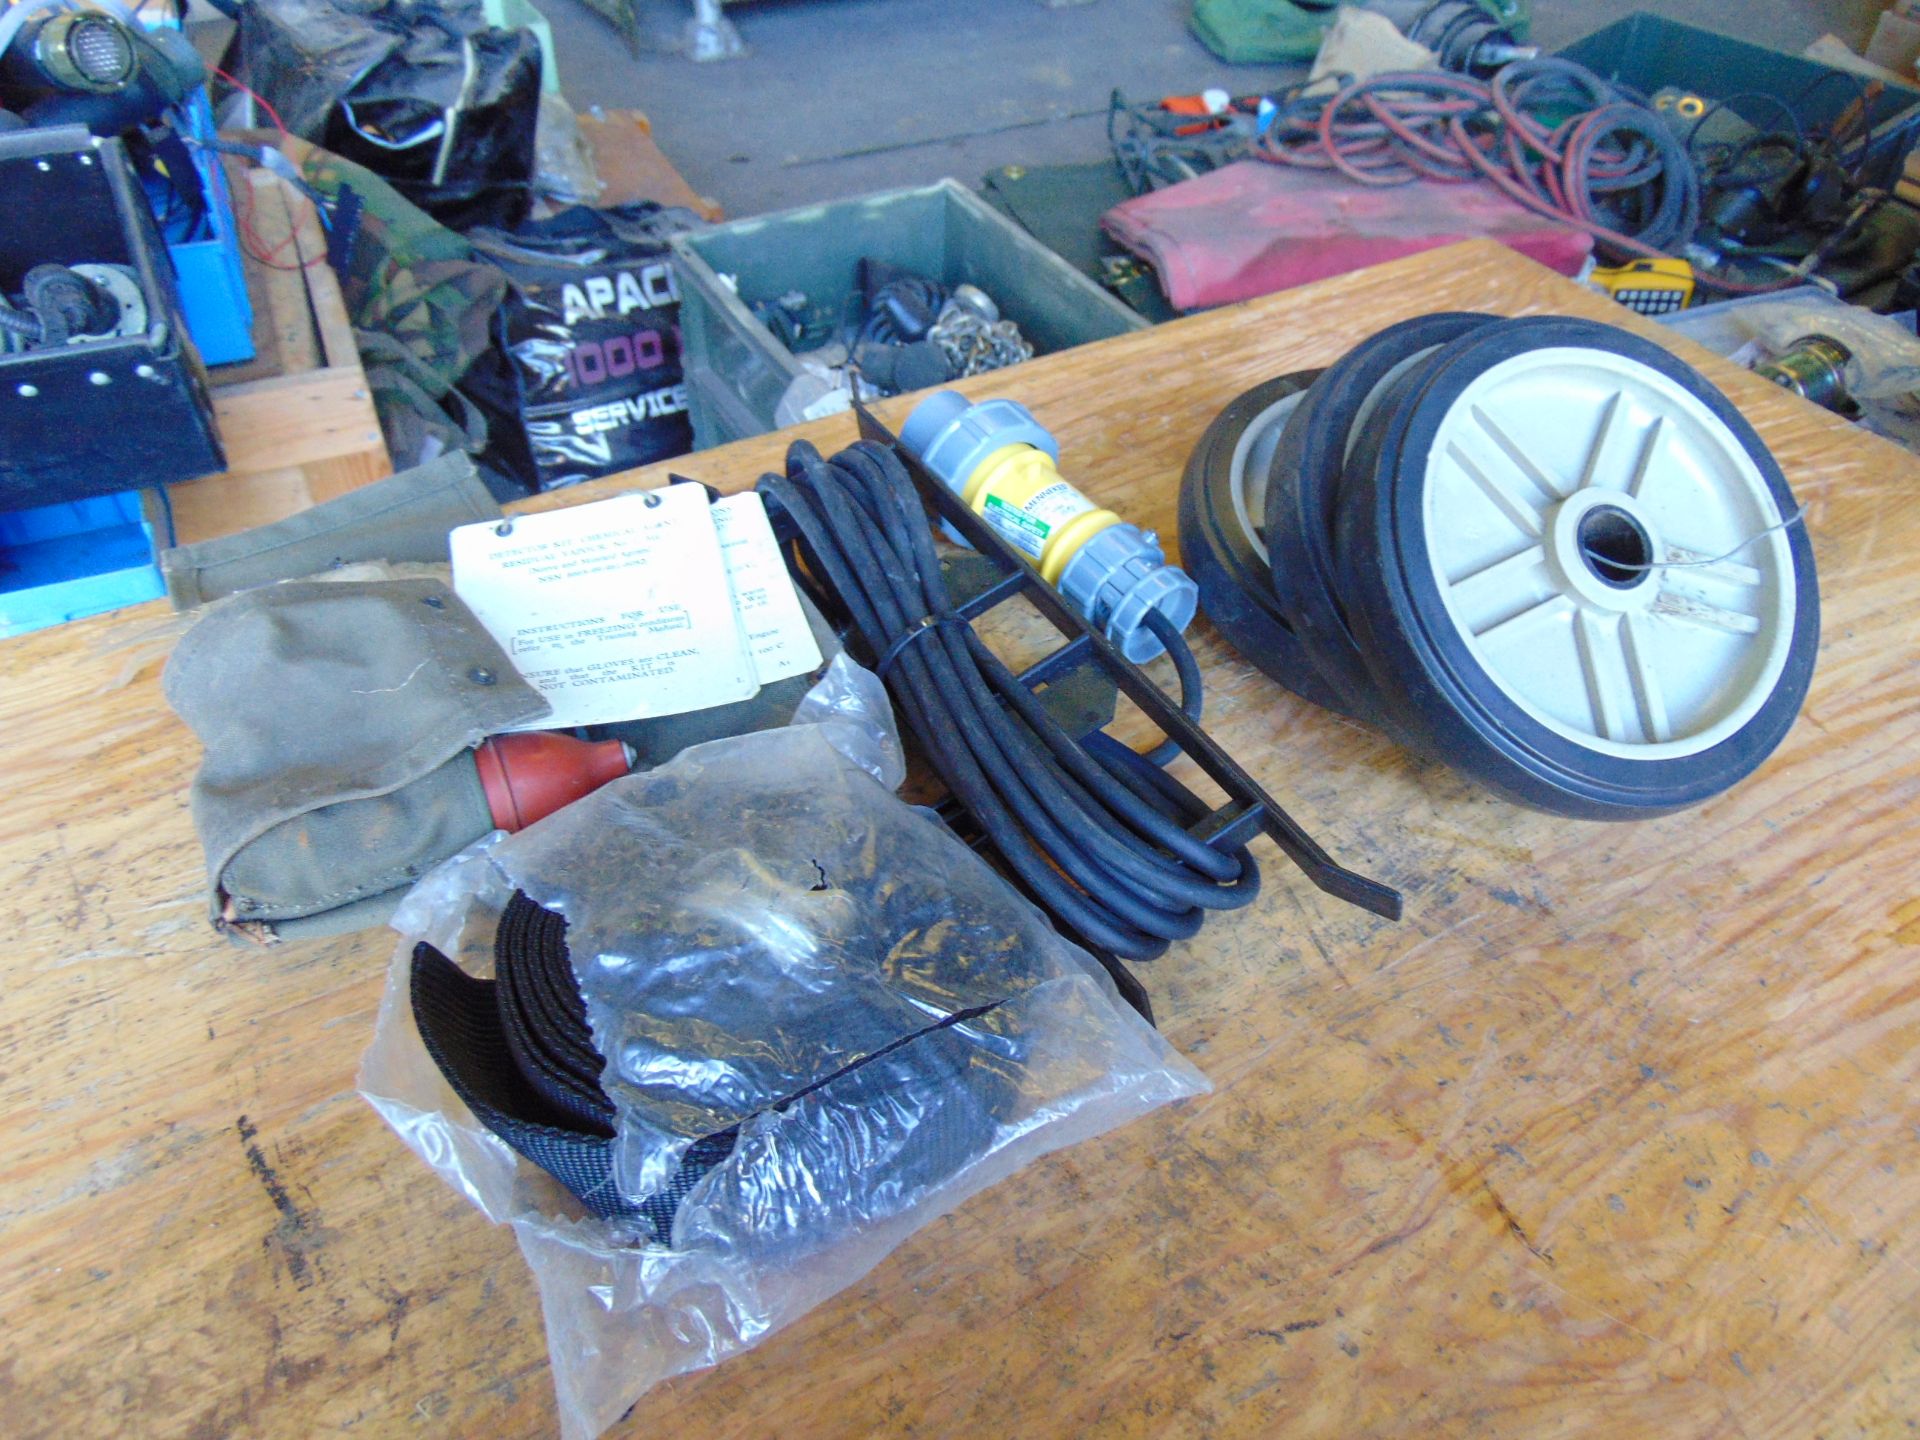 Wheels, Ext Lead, Straps, Chemical Agent Test Kit - Image 5 of 6